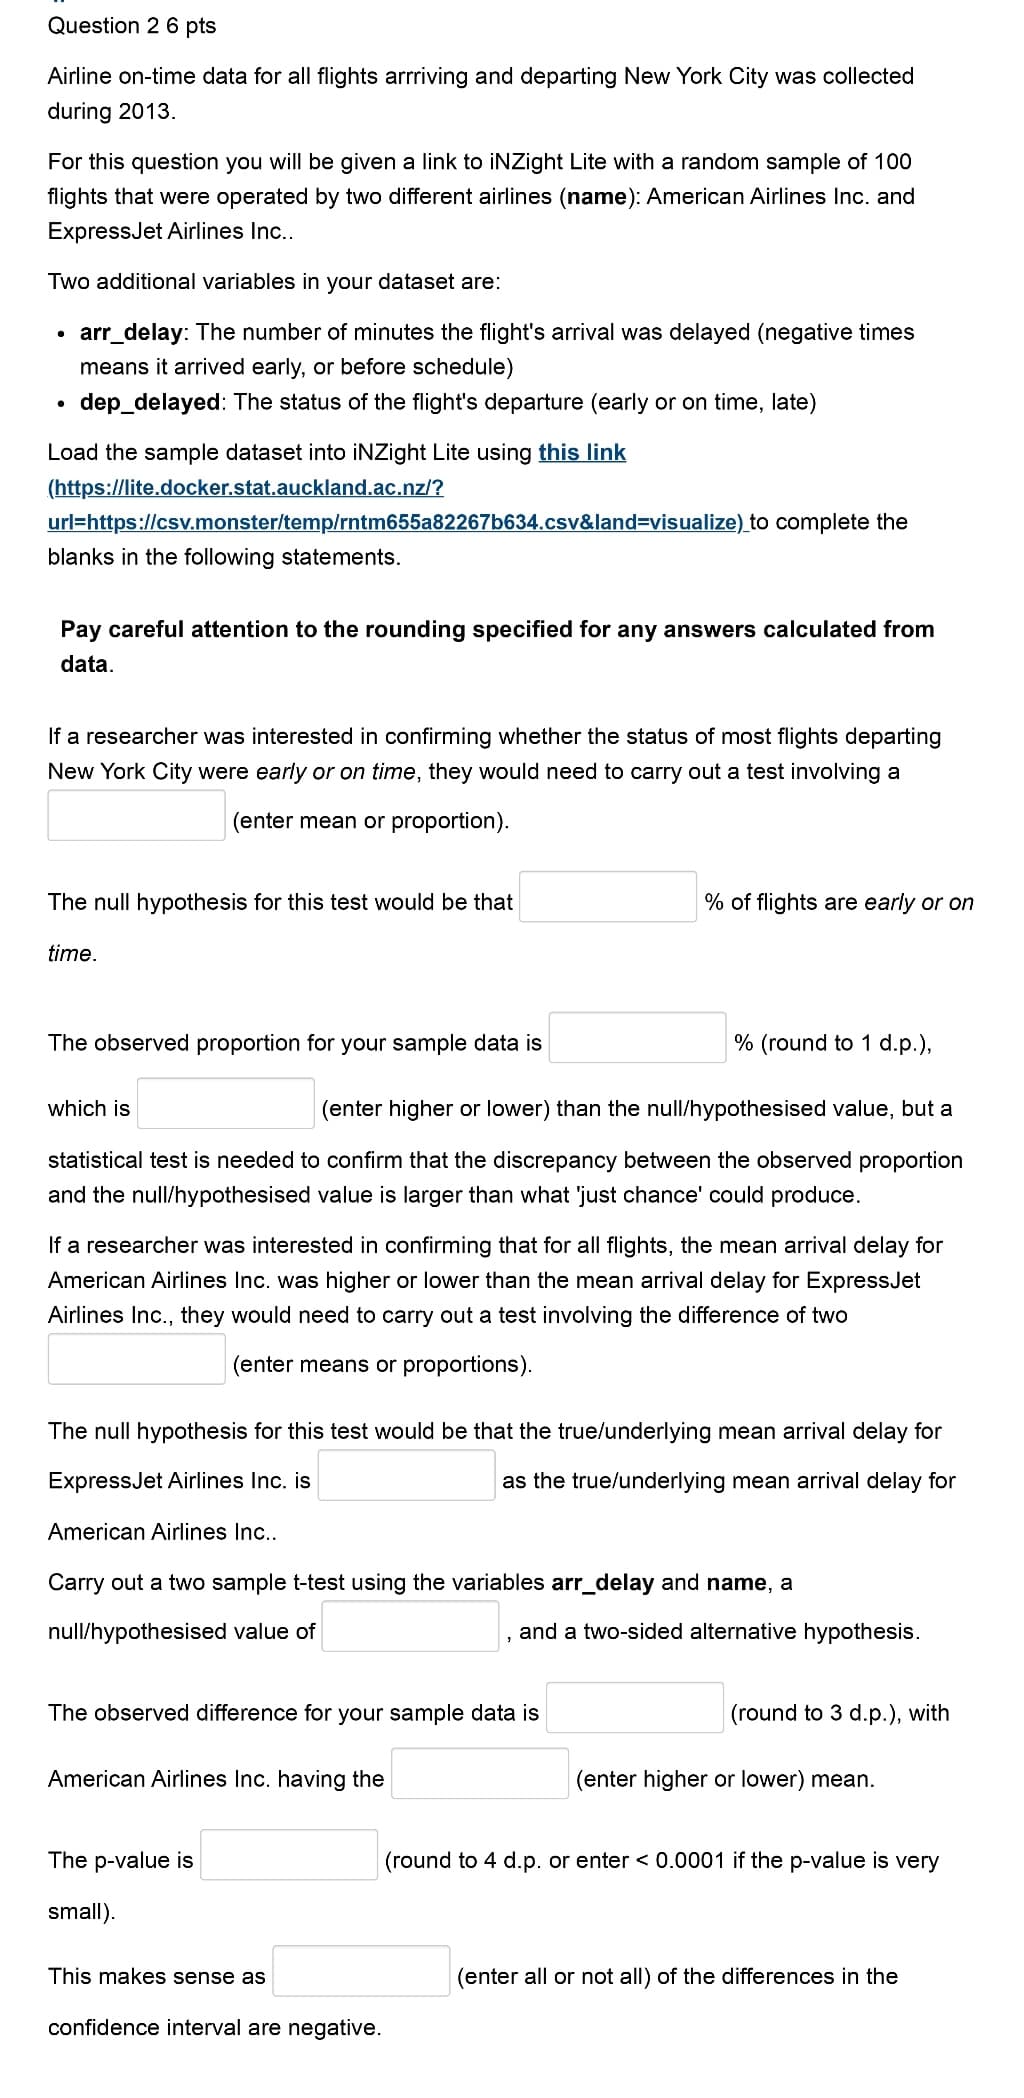 Question 2 6 pts
Airline on-time data for all flights arrriving and departing New York City was collected
during 2013.
For this question you will be given a link to iNZight Lite with a random sample of 100
flights that were operated by two different airlines (name): American Airlines Inc. and
ExpressJet Airlines Inc..
Two additional variables in your dataset are:
•
•
arr_delay: The number of minutes the flight's arrival was delayed (negative times
means it arrived early, or before schedule)
dep_delayed: The status of the flight's departure (early or on time, late)
Load the sample dataset into iNZight Lite using this link
(https://lite.docker.stat.auckland.ac.nz/?
url=https://csv.monster/temp/rntm655a82267b634.csv&land=visualize) to complete the
blanks in the following statements.
Pay careful attention to the rounding specified for any answers calculated from
data.
If a researcher was interested in confirming whether the status of most flights departing
New York City were early or on time, they would need to carry out a test involving a
(enter mean or proportion).
The null hypothesis for this test would be that
% of flights are early or on
time.
The observed proportion for your sample data is
which is
% (round to 1 d.p.),
(enter higher or lower) than the null/hypothesised value, but a
statistical test is needed to confirm that the discrepancy between the observed proportion
and the null/hypothesised value is larger than what 'just chance' could produce.
If a researcher was interested in confirming that for all flights, the mean arrival delay for
American Airlines Inc. was higher or lower than the mean arrival delay for ExpressJet
Airlines Inc., they would need to carry out a test involving the difference of two
(enter means or proportions).
The null hypothesis for this test would be that the true/underlying mean arrival delay for
ExpressJet Airlines Inc. is
American Airlines Inc..
as the true/underlying mean arrival delay for
Carry out a two sample t-test using the variables arr_delay and name, a
null/hypothesised value of
and a two-sided alternative hypothesis.
(round to 3 d.p.), with
(enter higher or lower) mean.
The observed difference for your sample data is
American Airlines Inc. having the
The p-value is
(round to 4 d.p. or enter <0.0001 if the p-value is very
small).
This makes sense as
(enter all or not all) of the differences in the
confidence interval are negative.